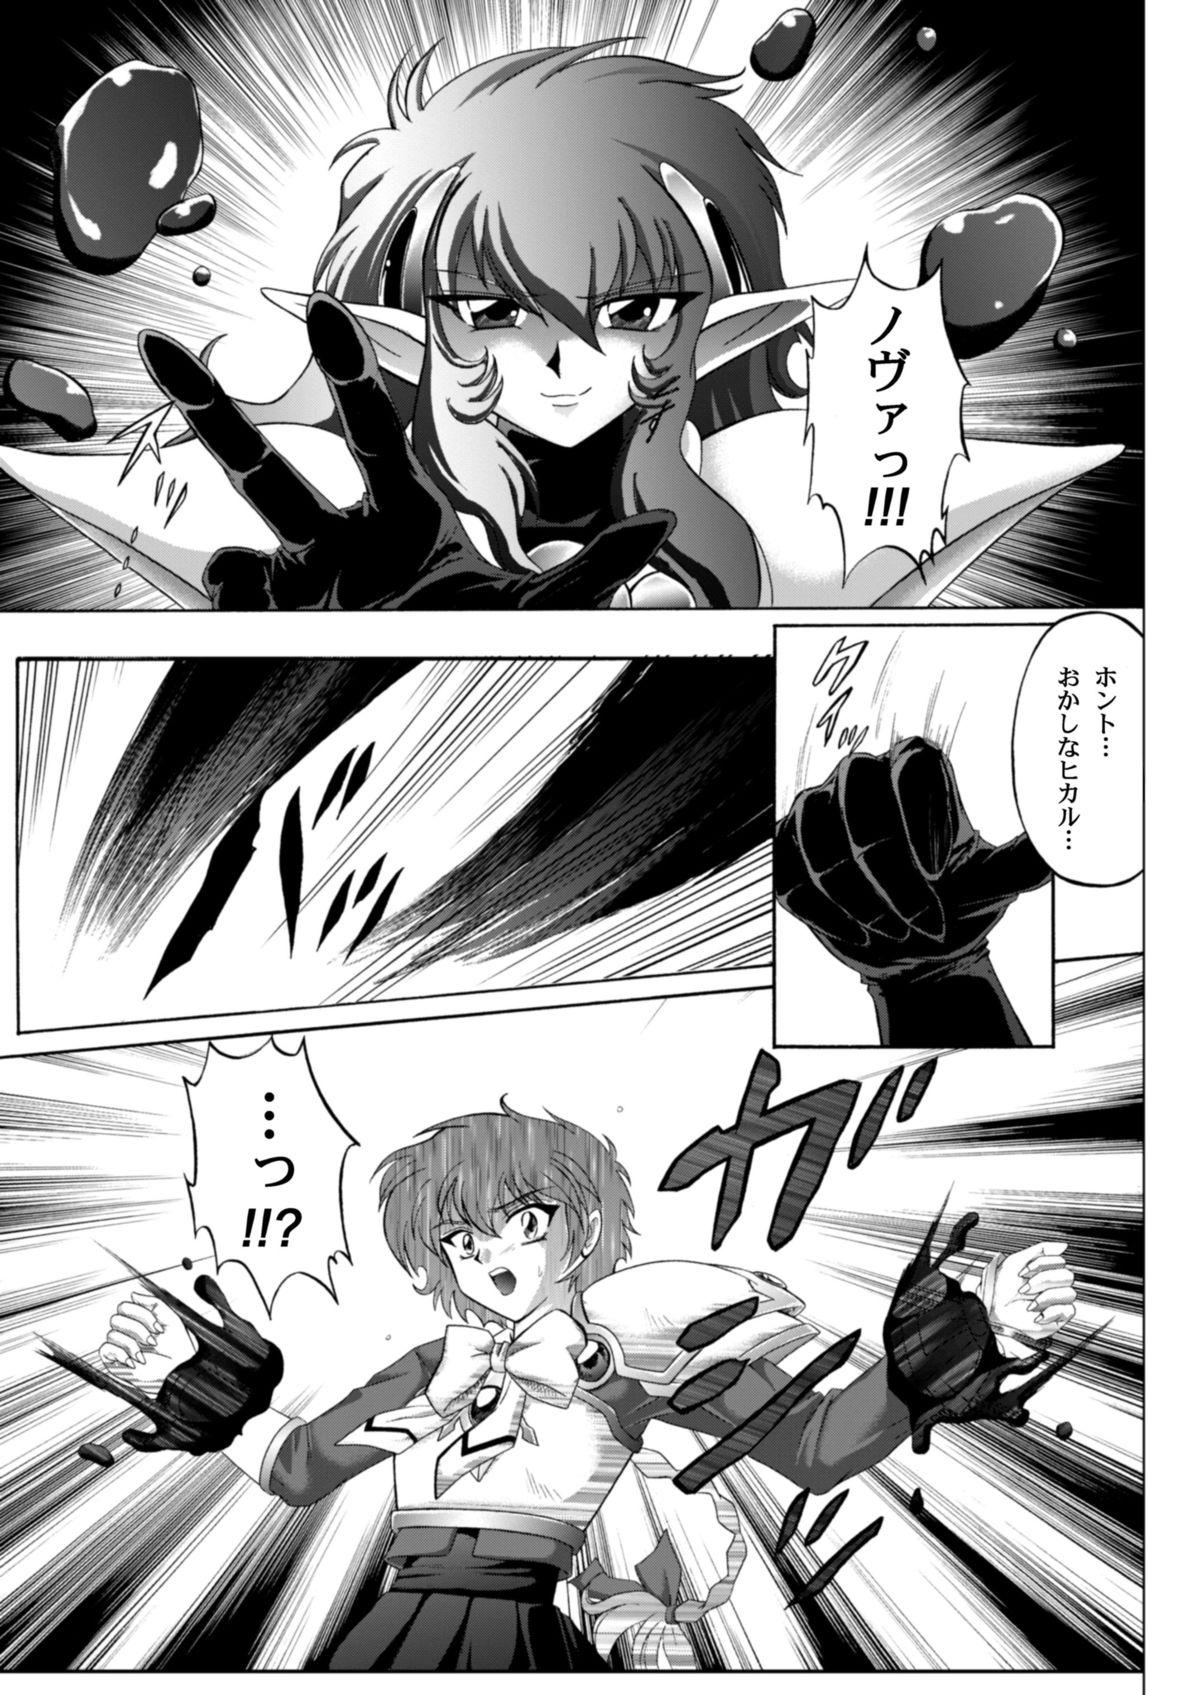 Stretching Centris Download edition - Magic knight rayearth Wrestling - Page 6